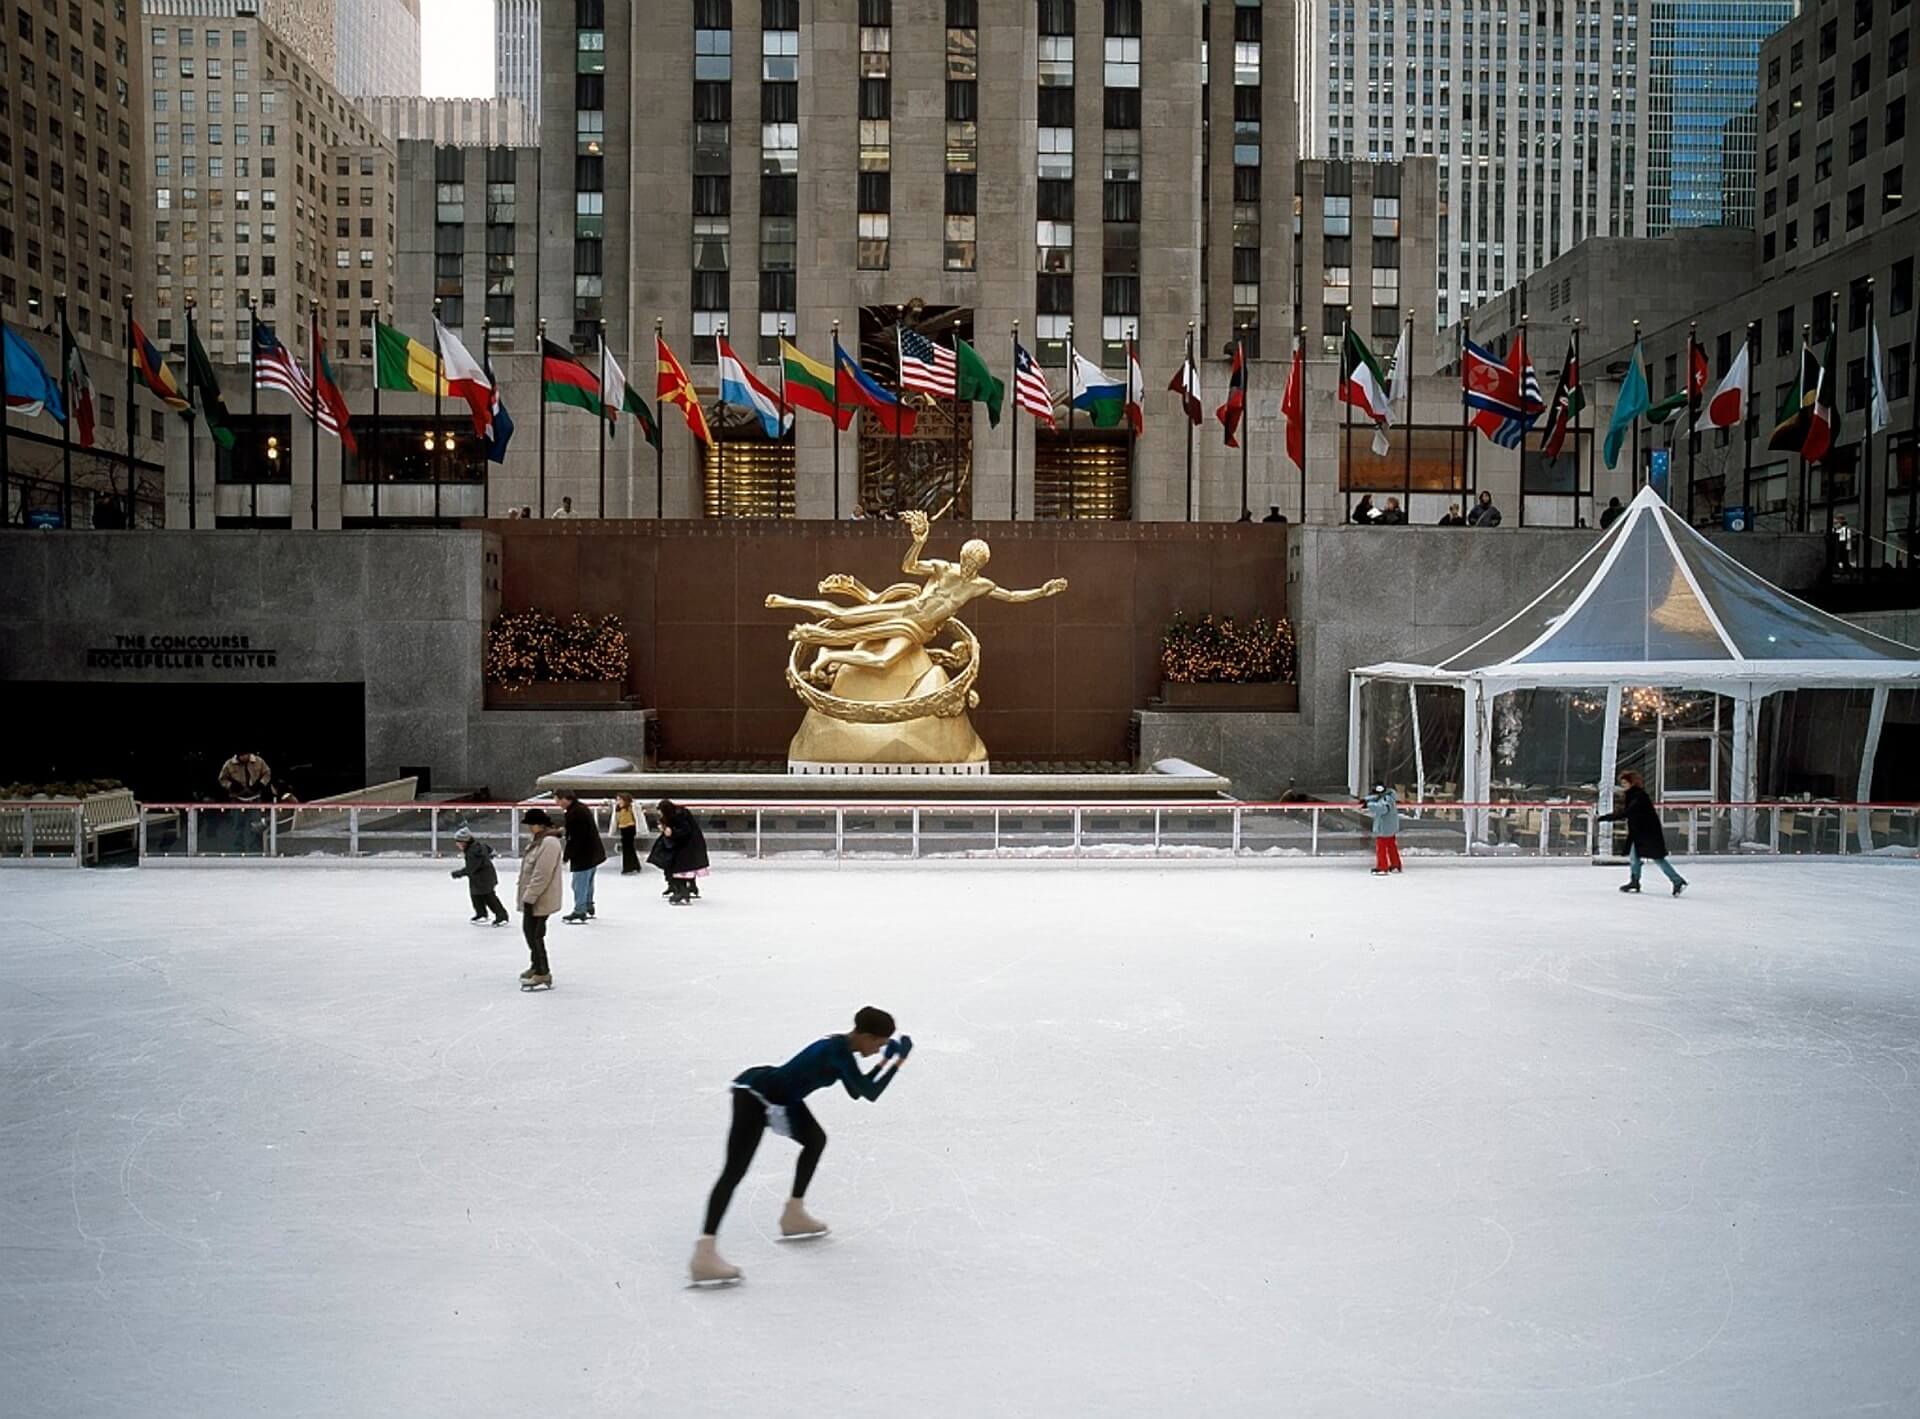 Ice skating in Rockefeller Center. A tradition in New York City for the holidays.